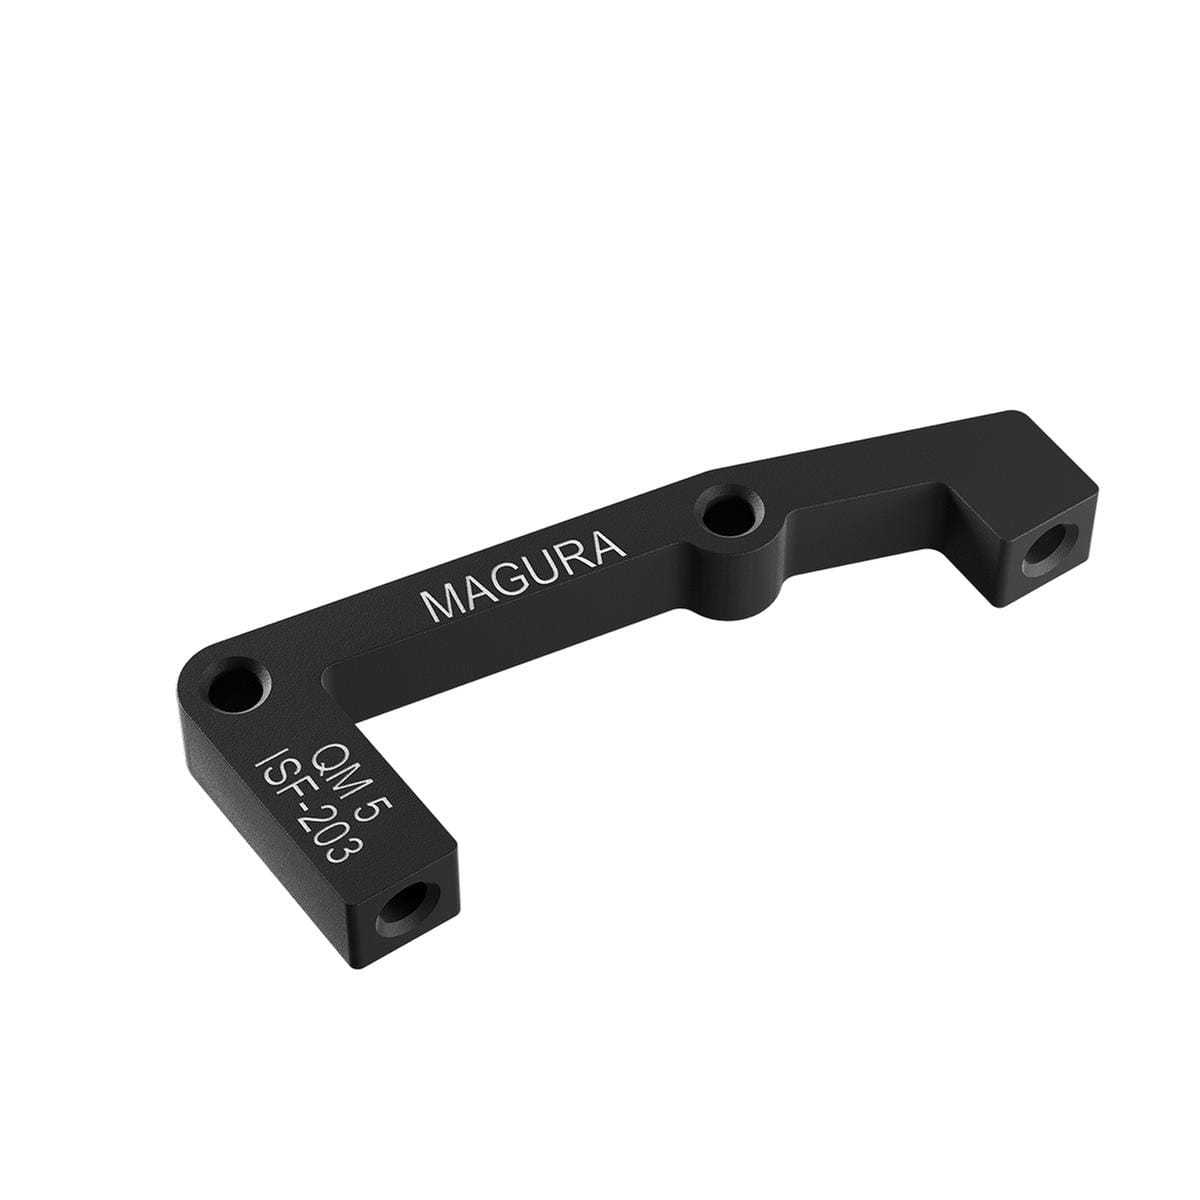 Magura QM 5 Adapter IS - Black, Adapters for Disc Brakes